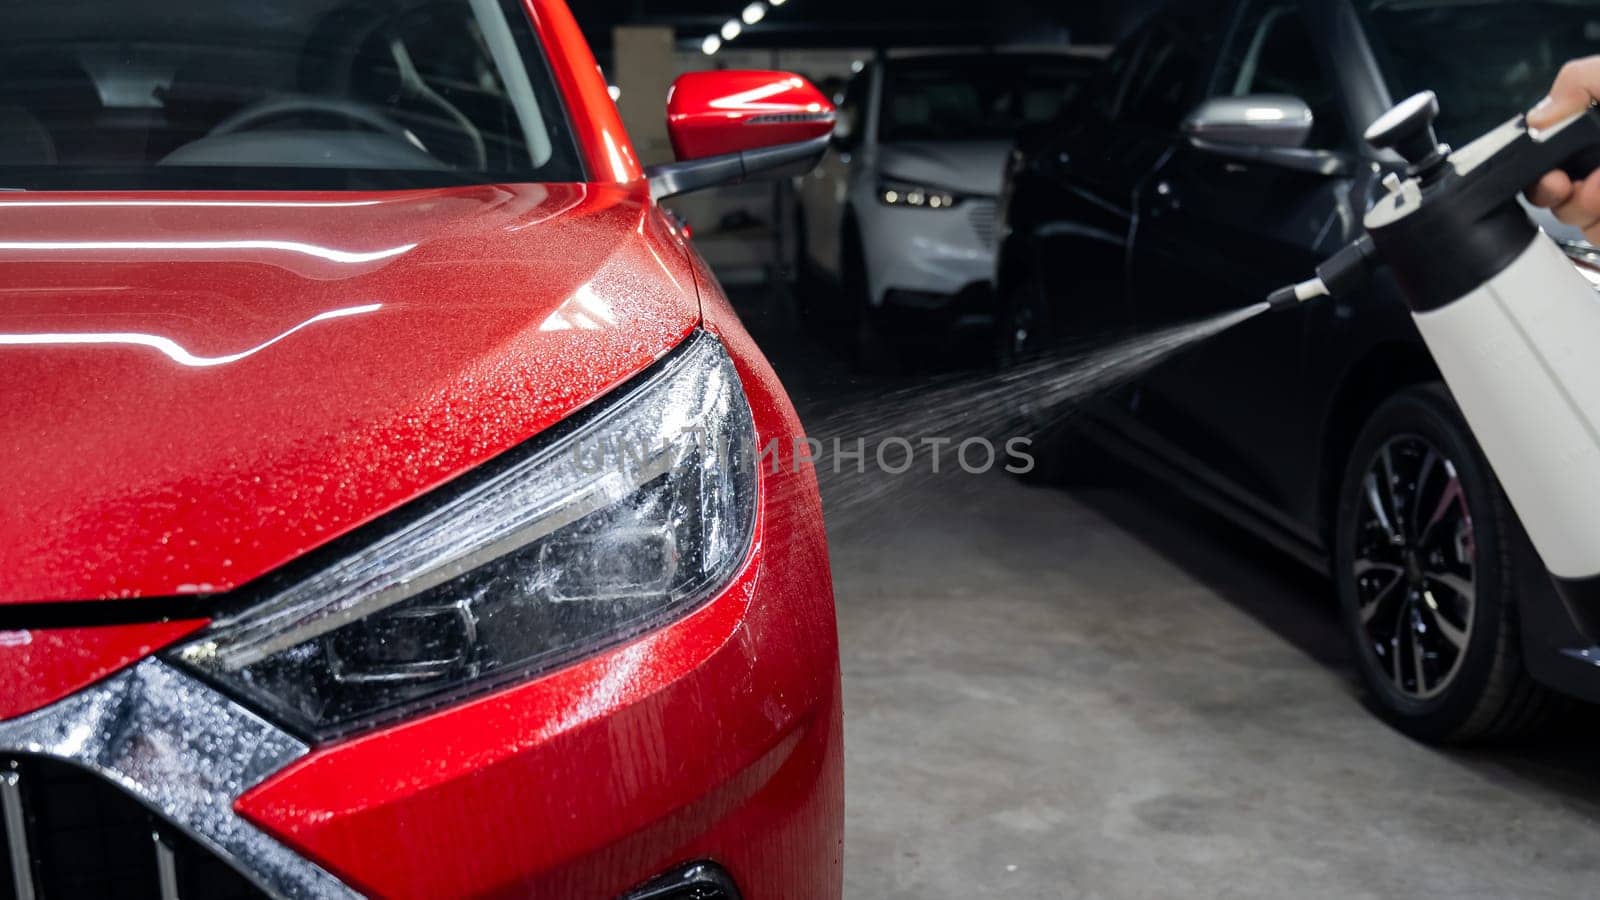 A man washes the headlights of a red car with a spray. by mrwed54